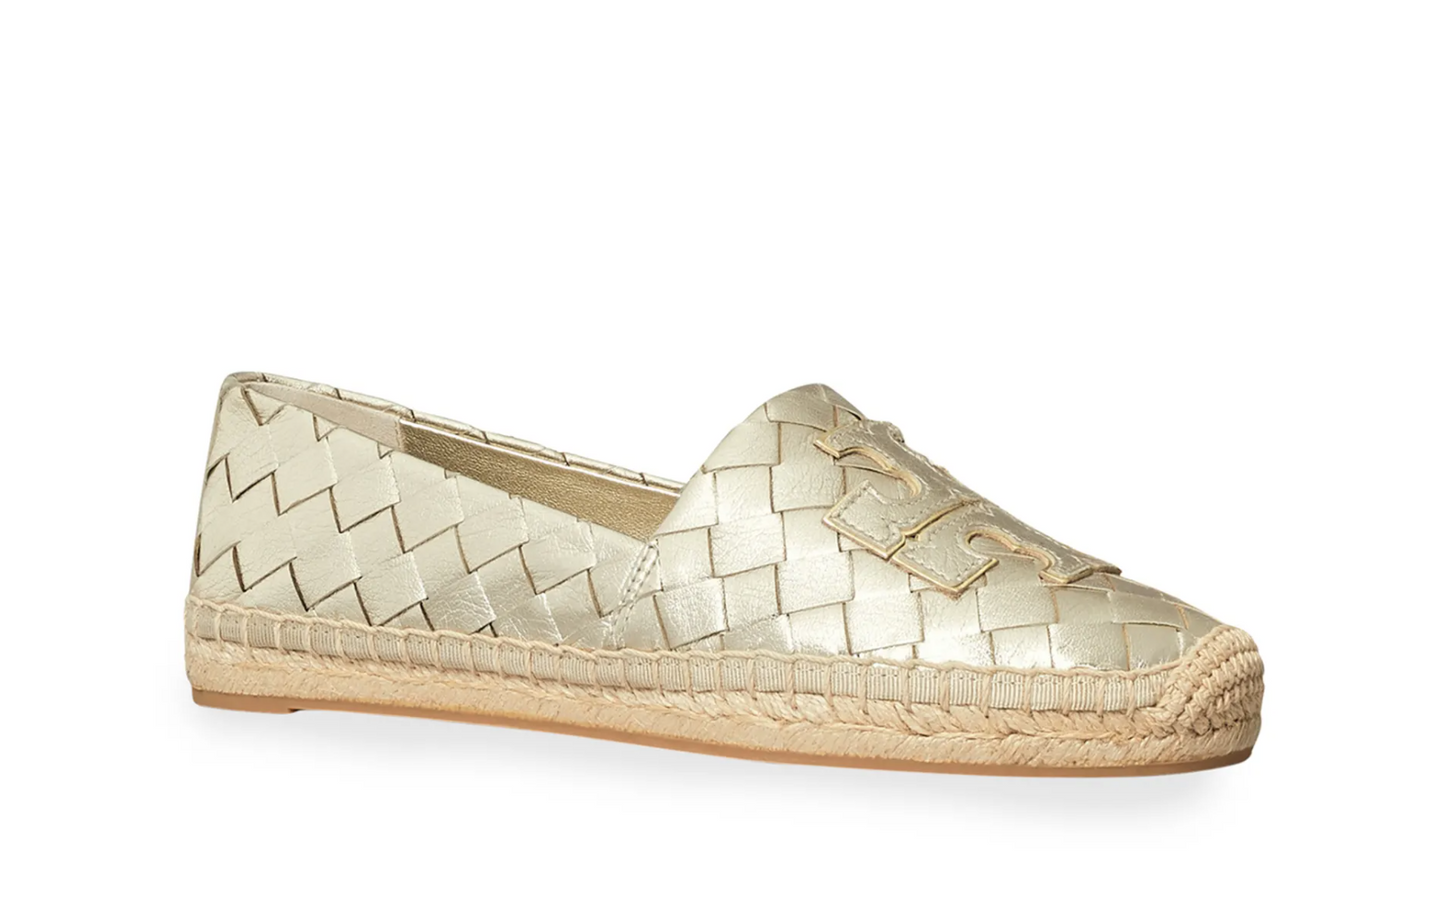 Tory Burch Ines Woven Espadrille - Size 10